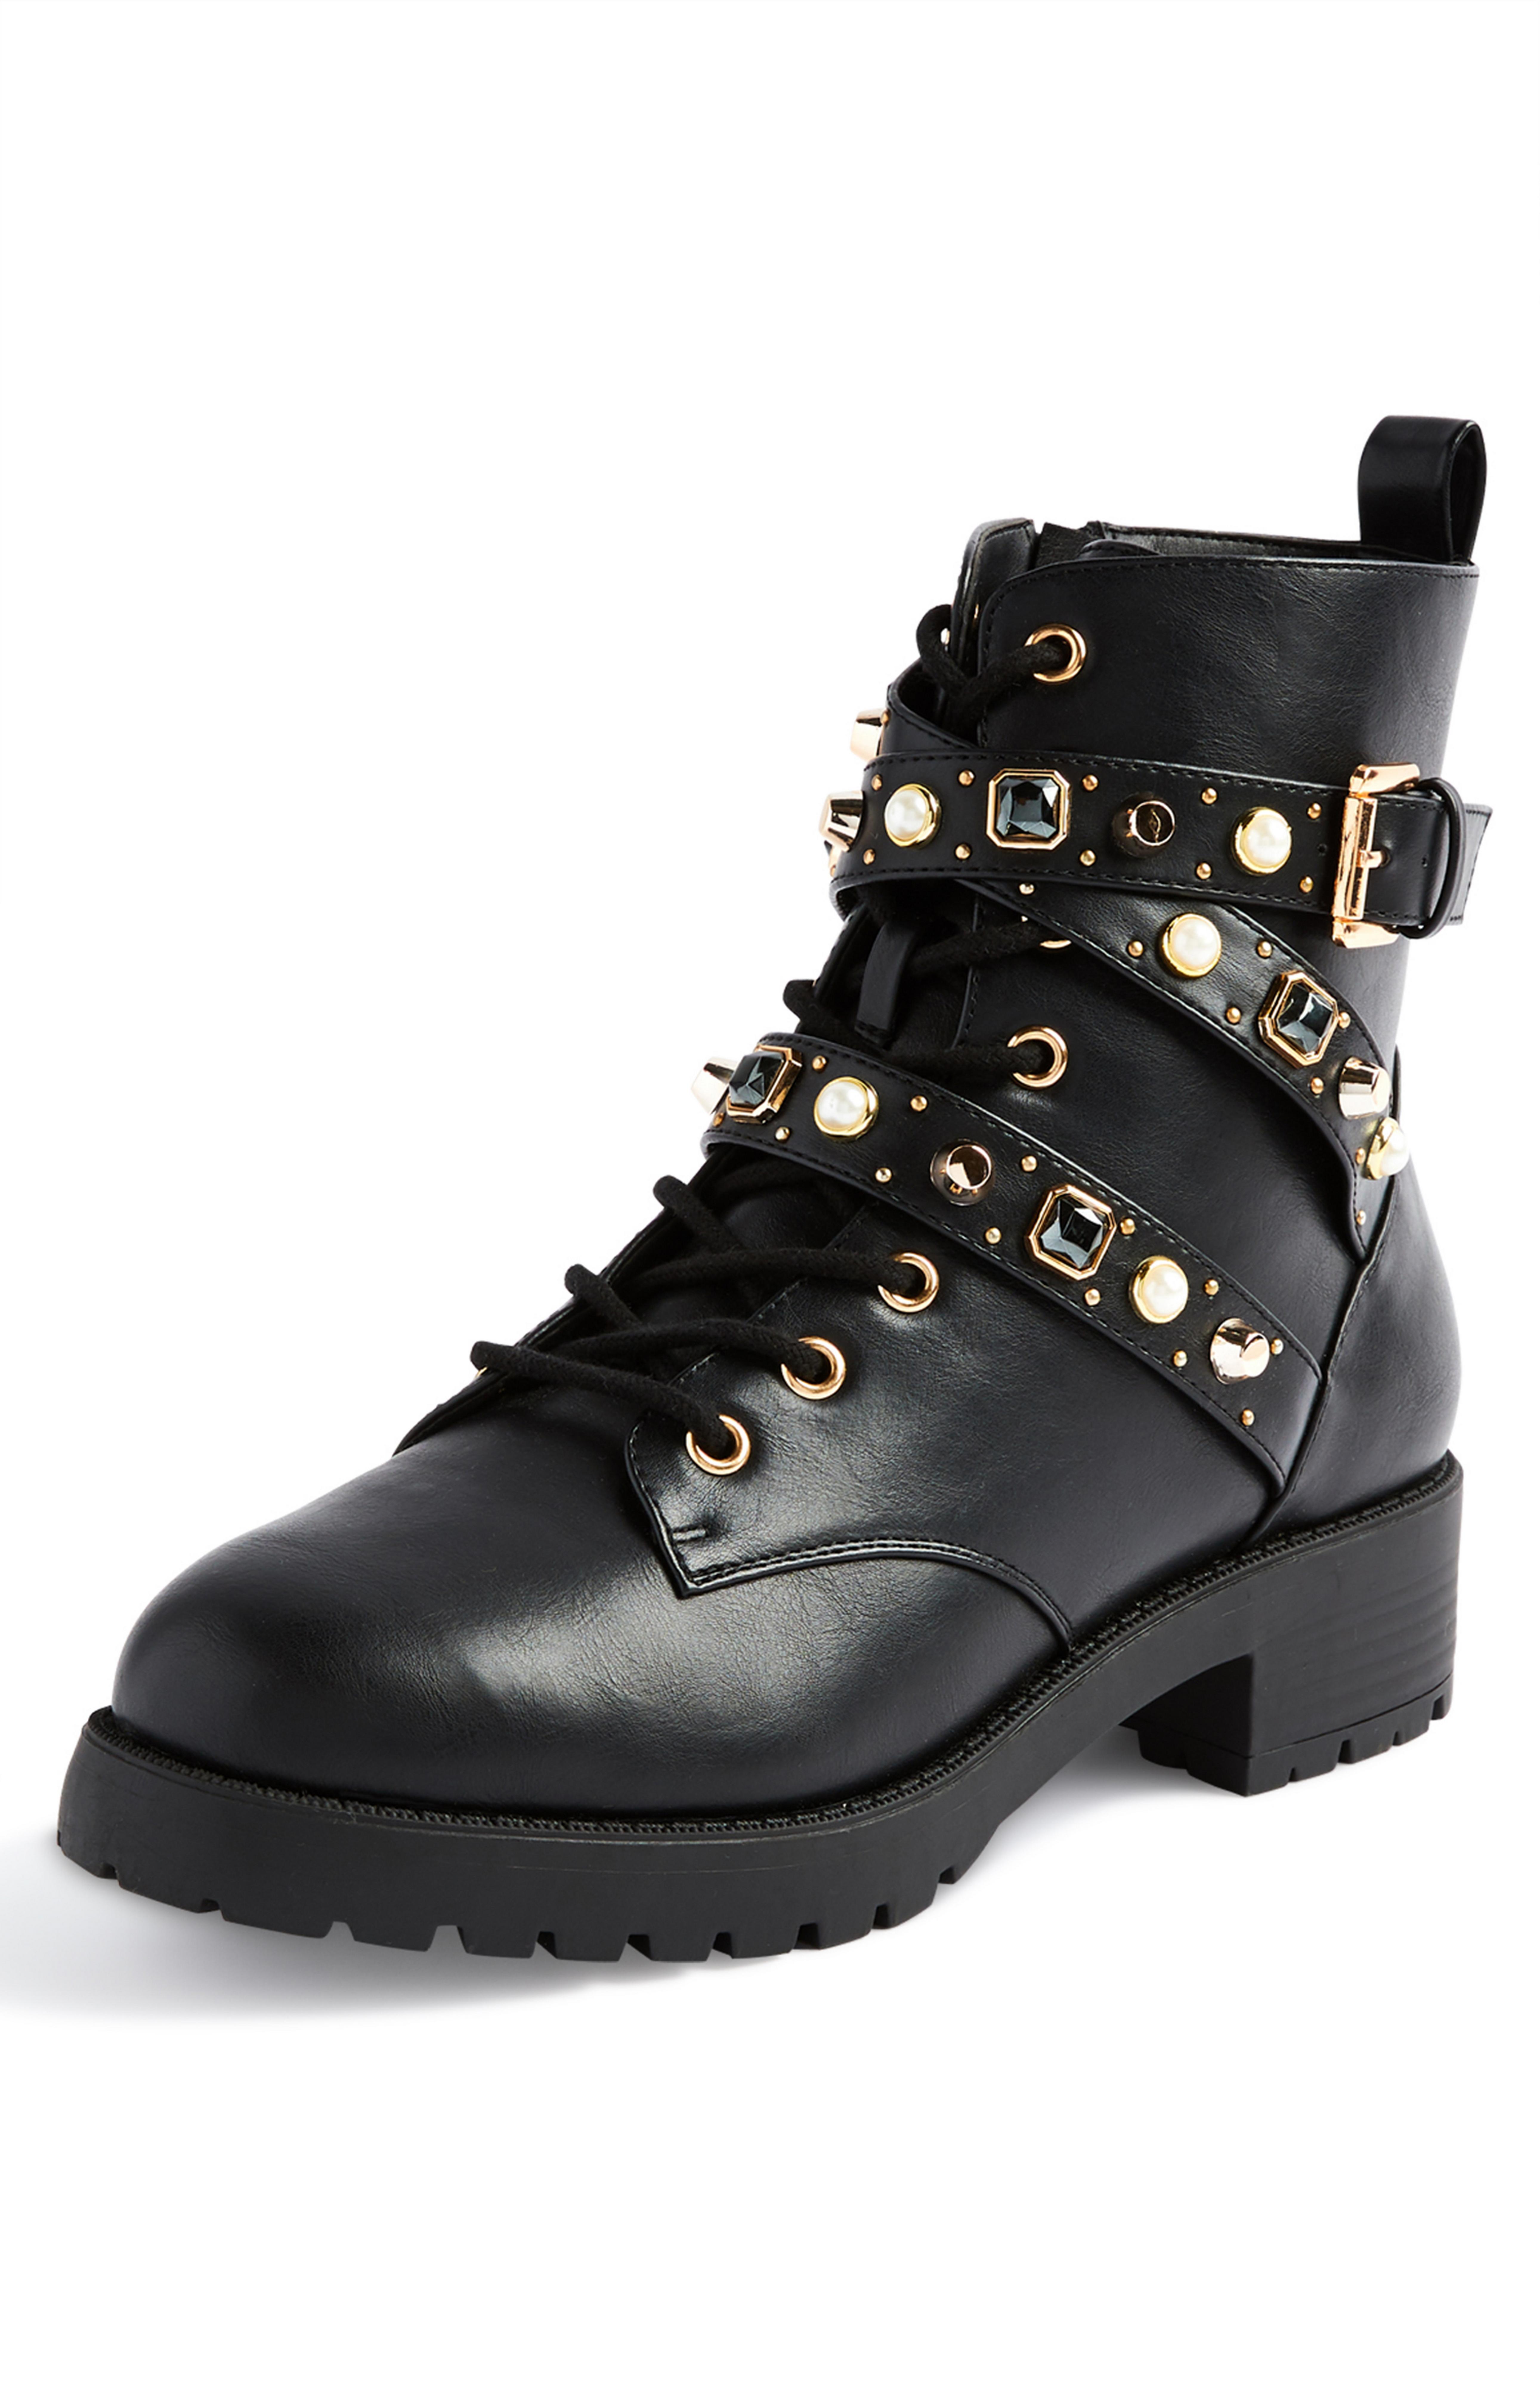 penneys black boots